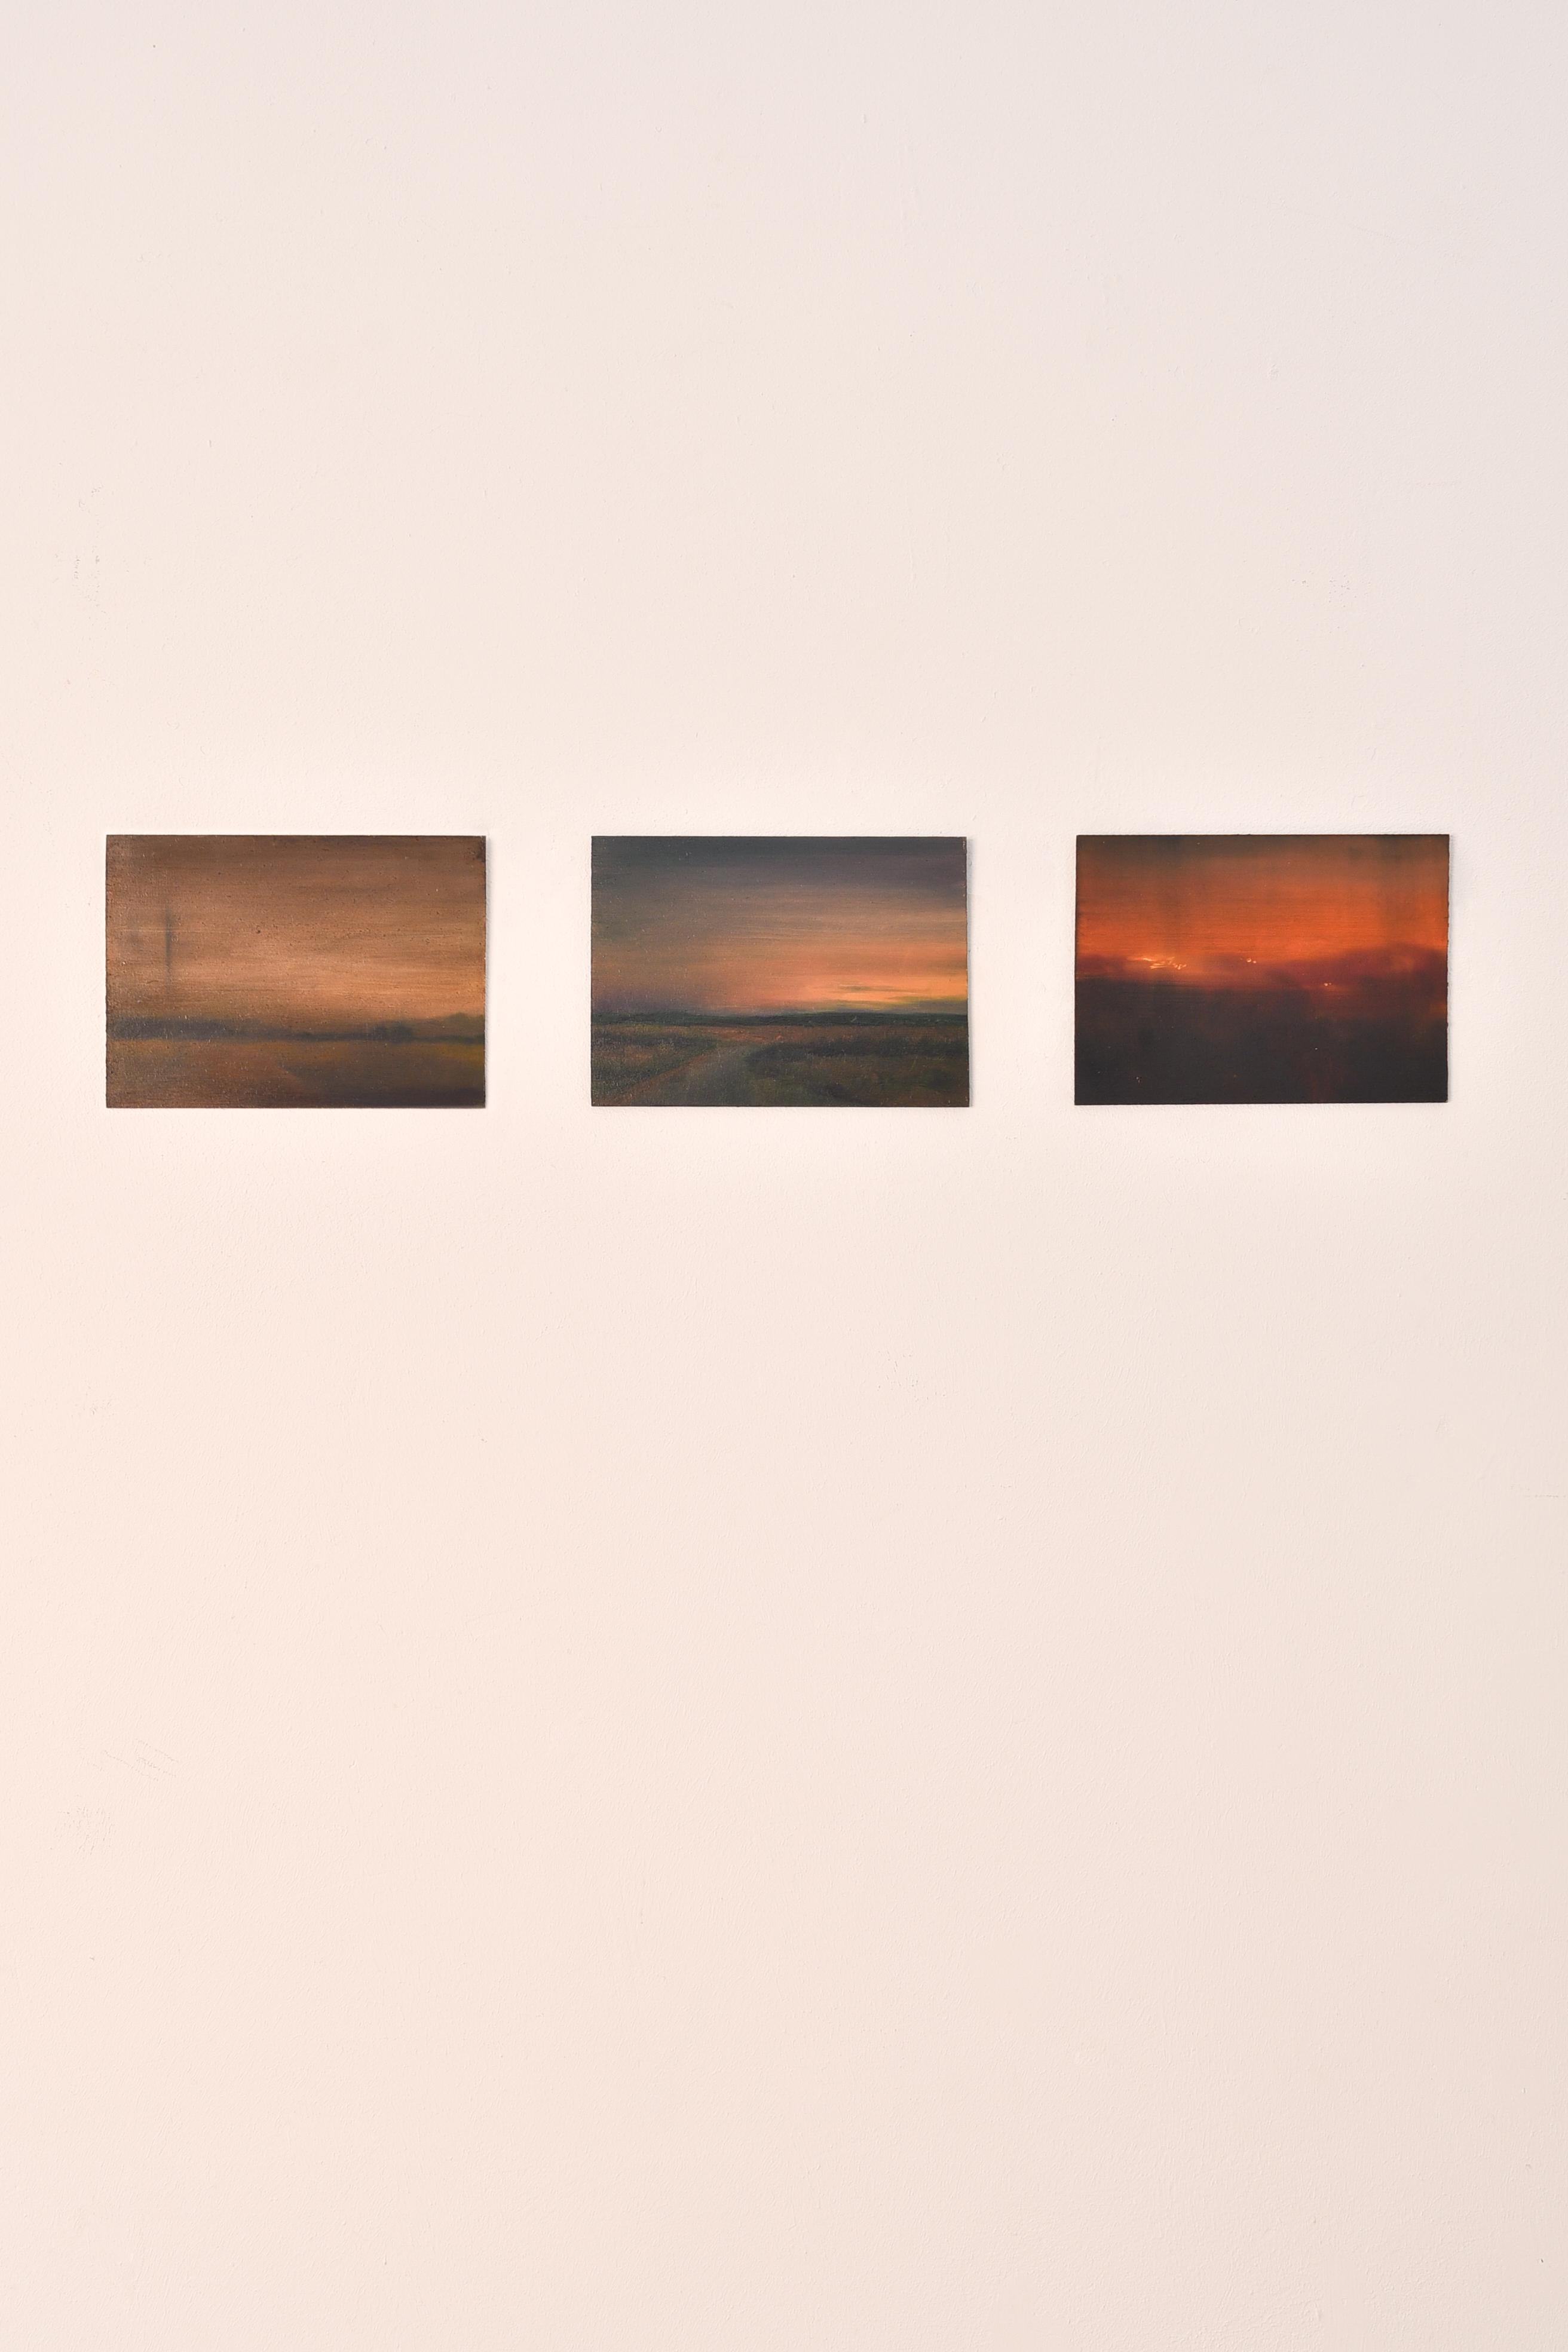 Set of 3 romantic evening light landscape paintings on thin wood panel (2022) - Painting by Neide Carreira